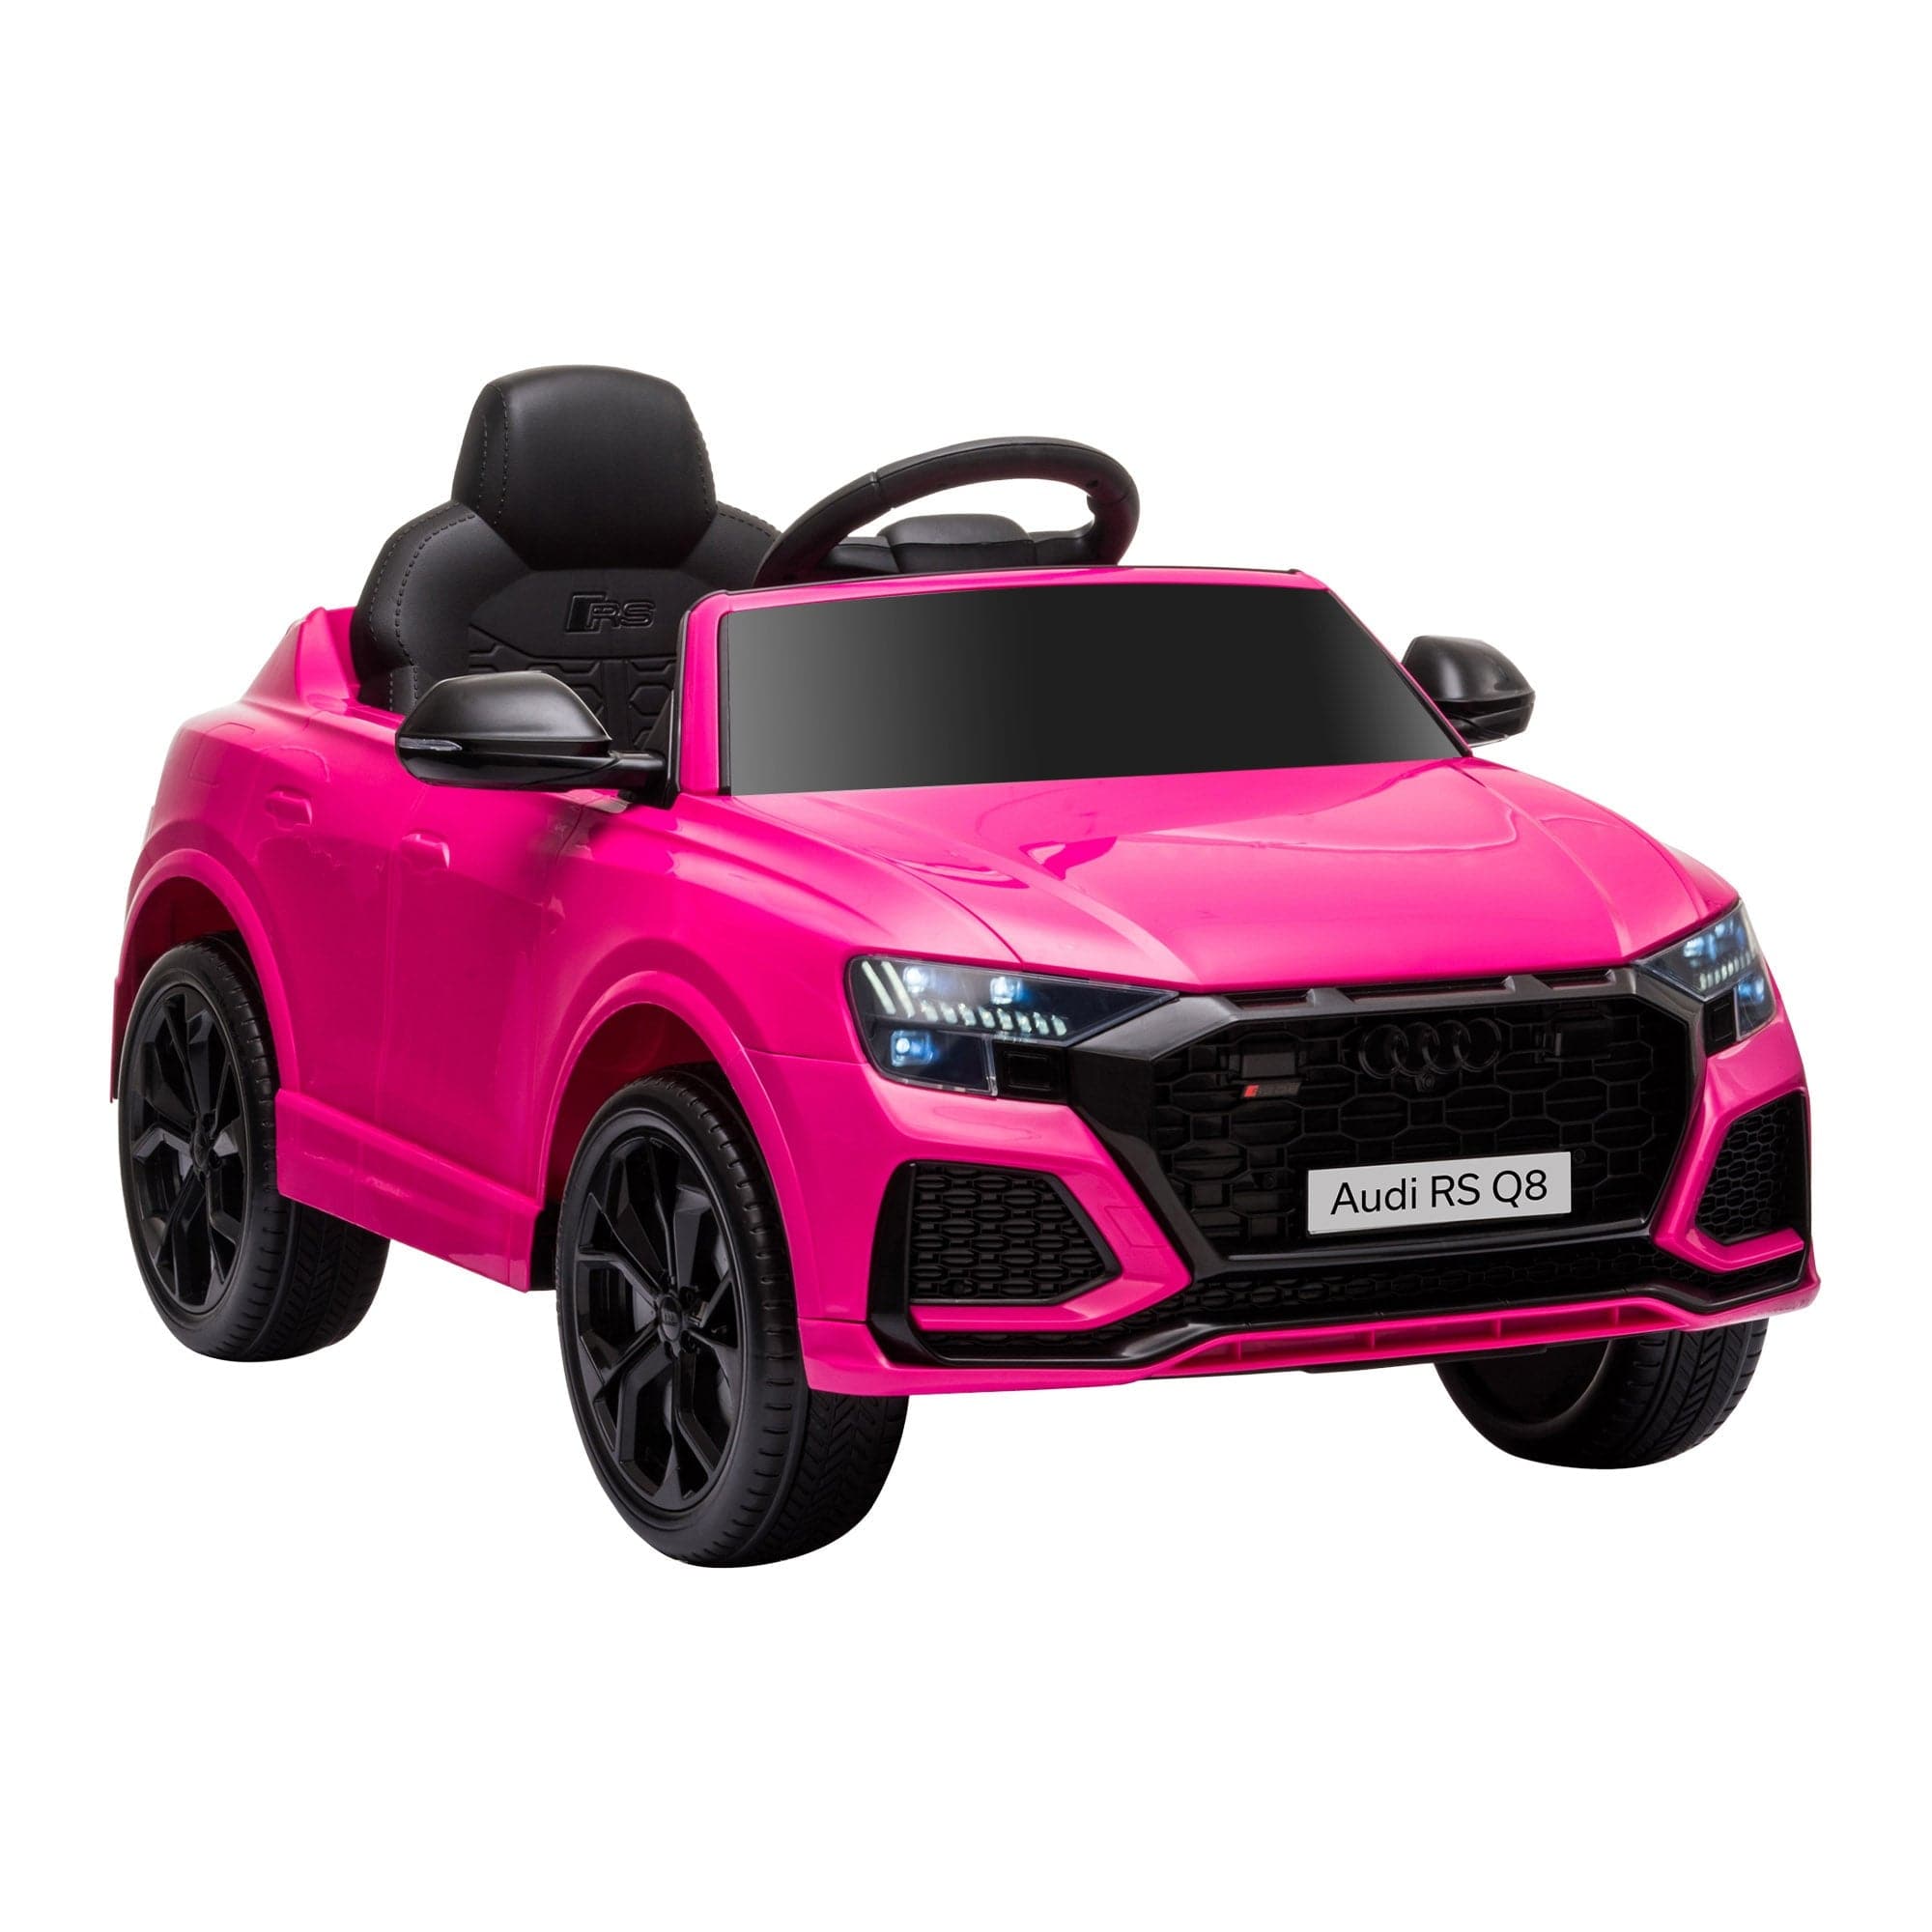 HOMCOM Audi RS Q8 6V Kids Electric Ride On Toy Car with Remote Control, USB & Bluetooth (Pink)